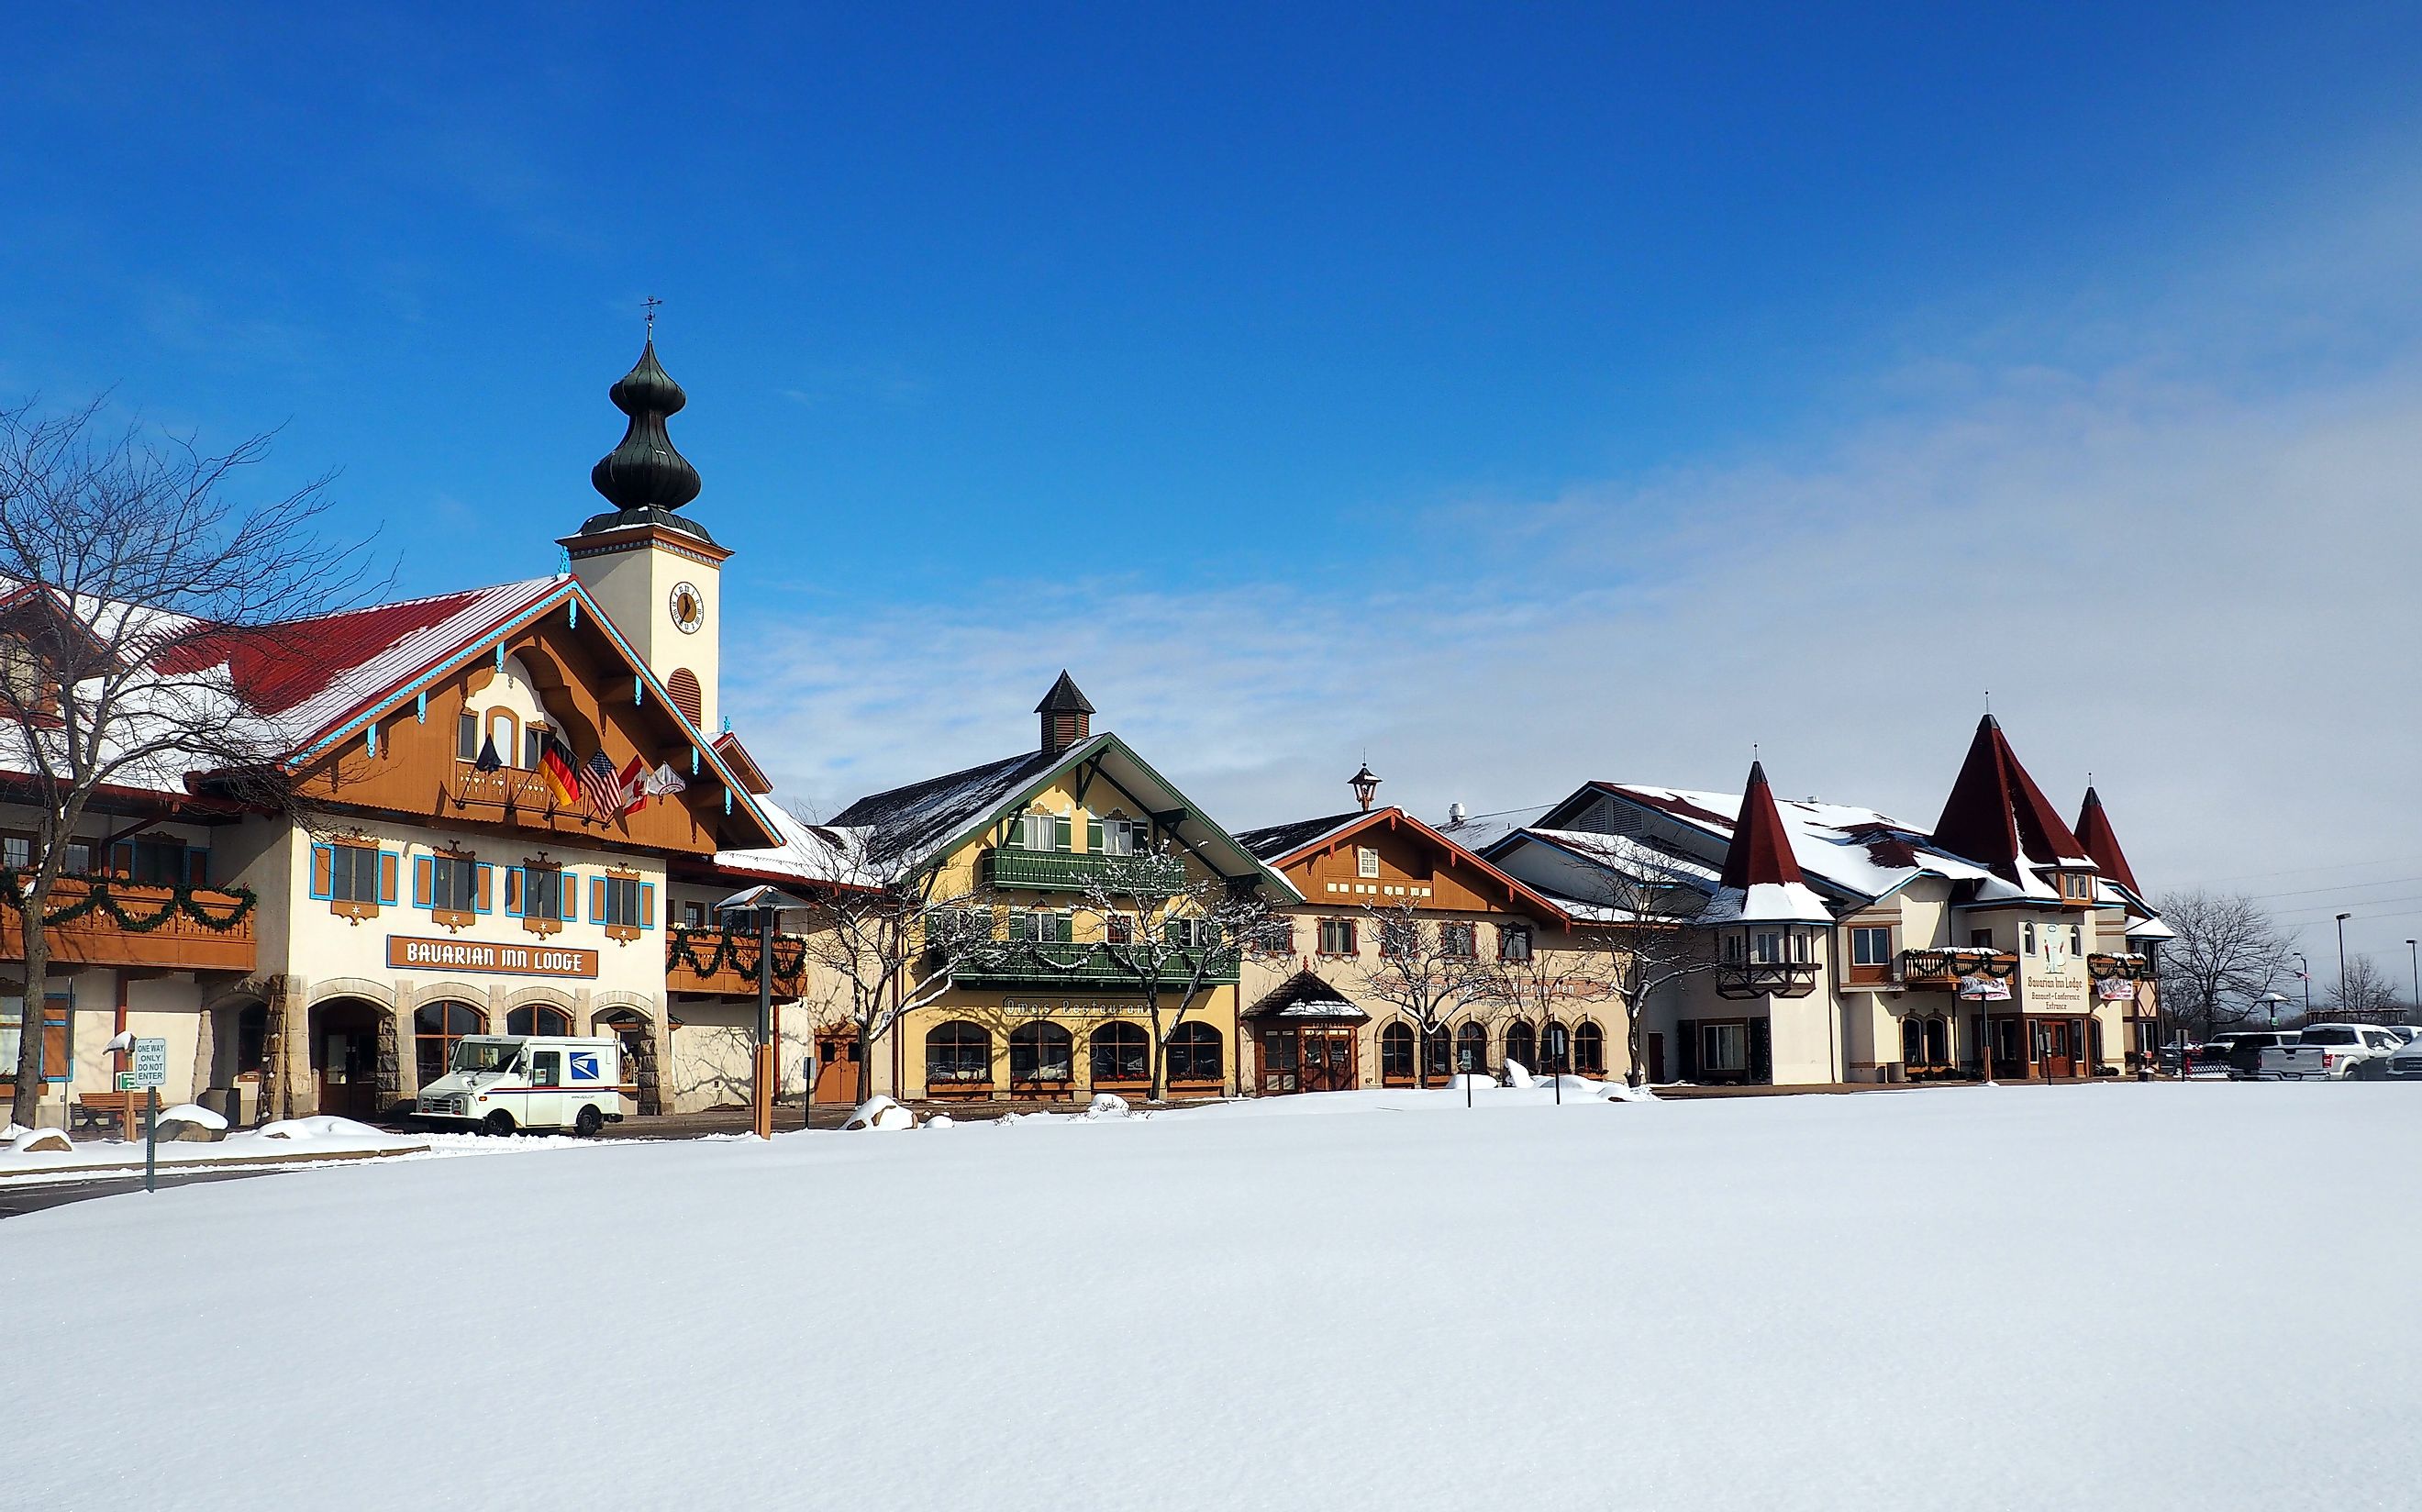 Bavarian-style houses of the Bavarian Inn center in Frankenmuth, Michigan, on a perfect winter day with a blue sky above and white snow on the ground. Editorial credit: T-I / Shutterstock.com